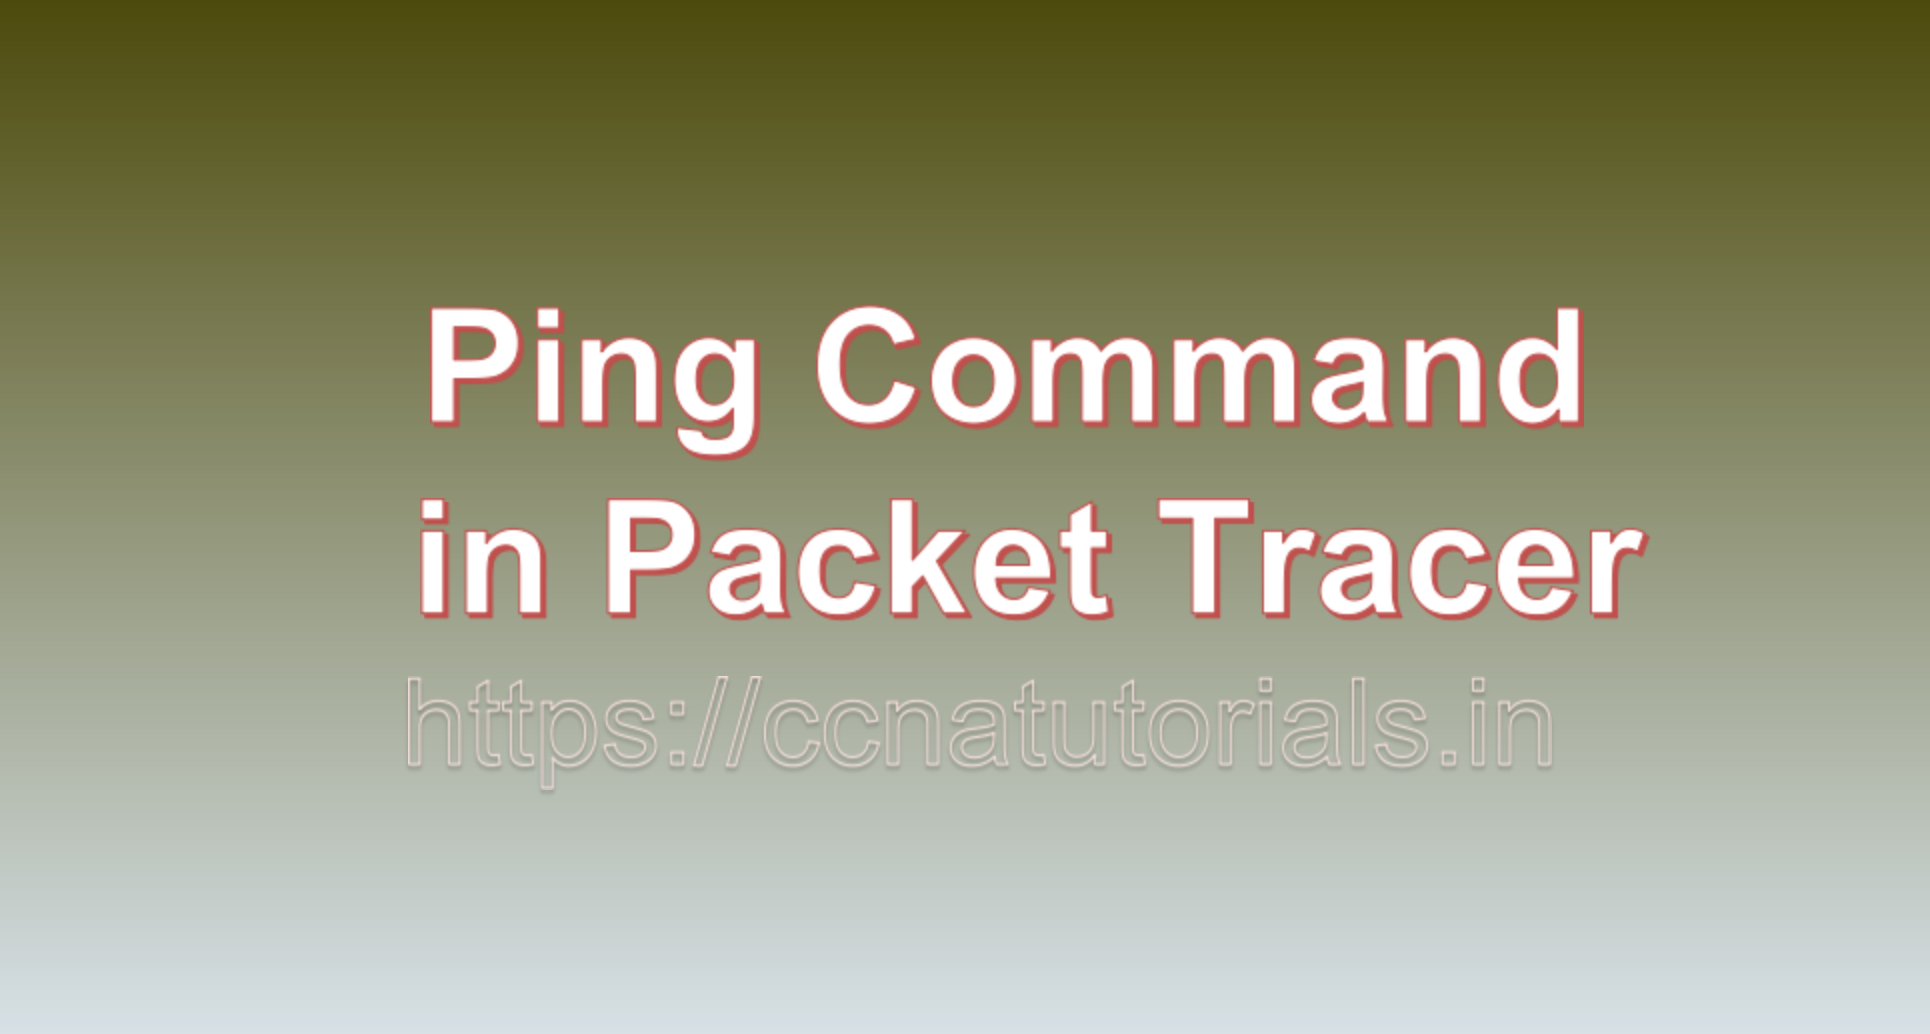 Ping Command in Packet Tracer, ccna, ccna tutorials